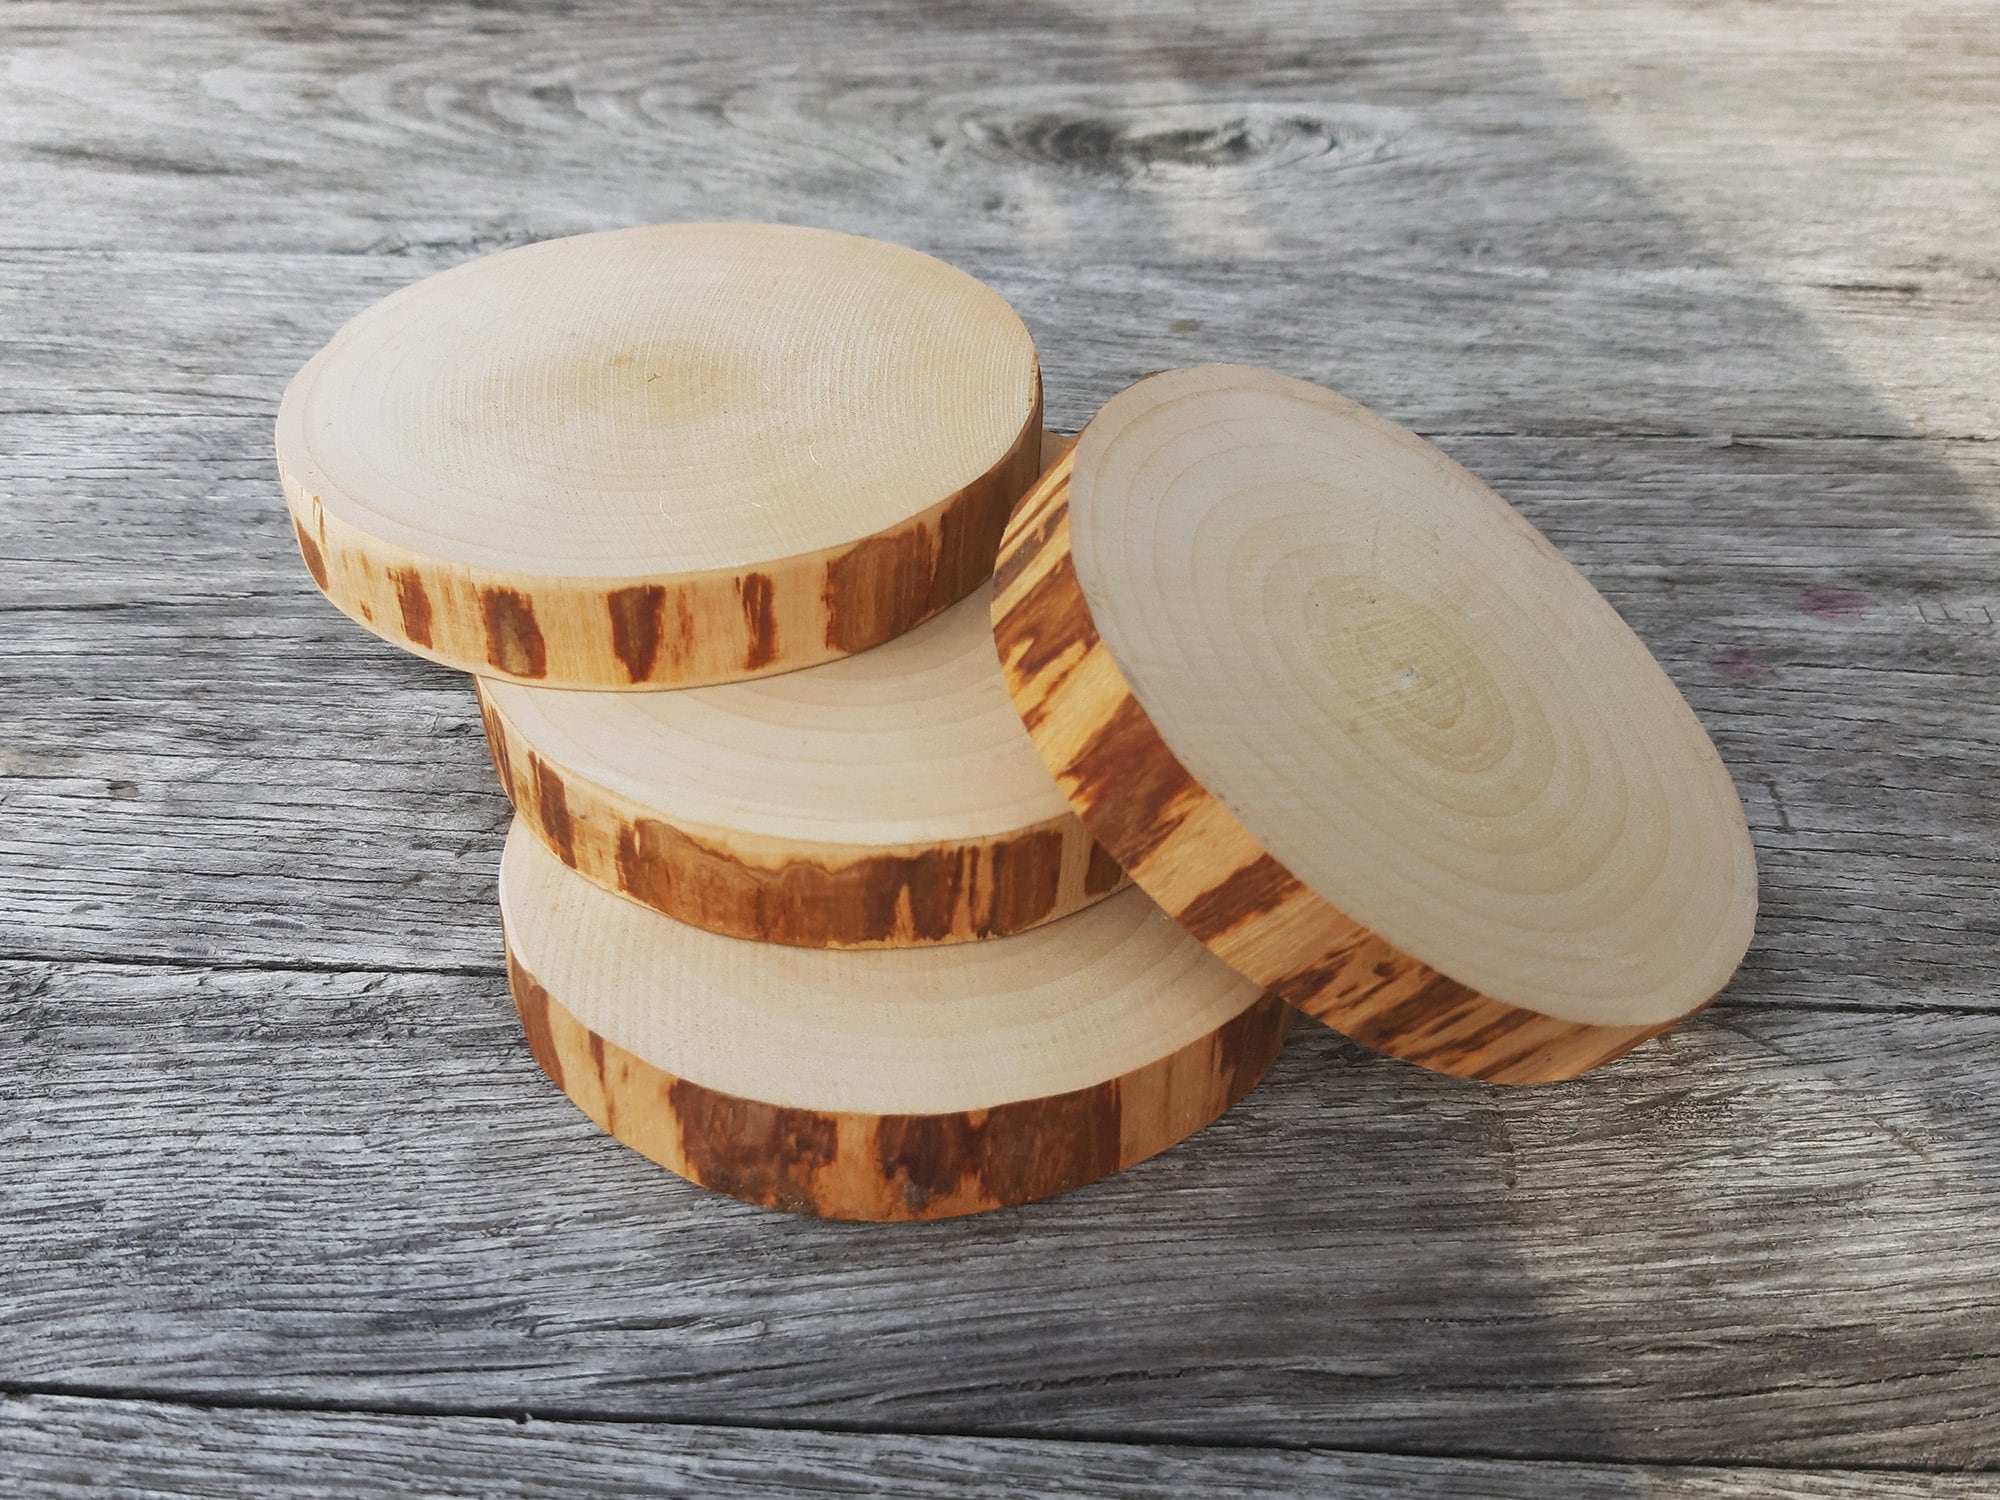 Set of 4, 4'' Rustic Wood Coasters, Wooden Drink Coasters, Hostess